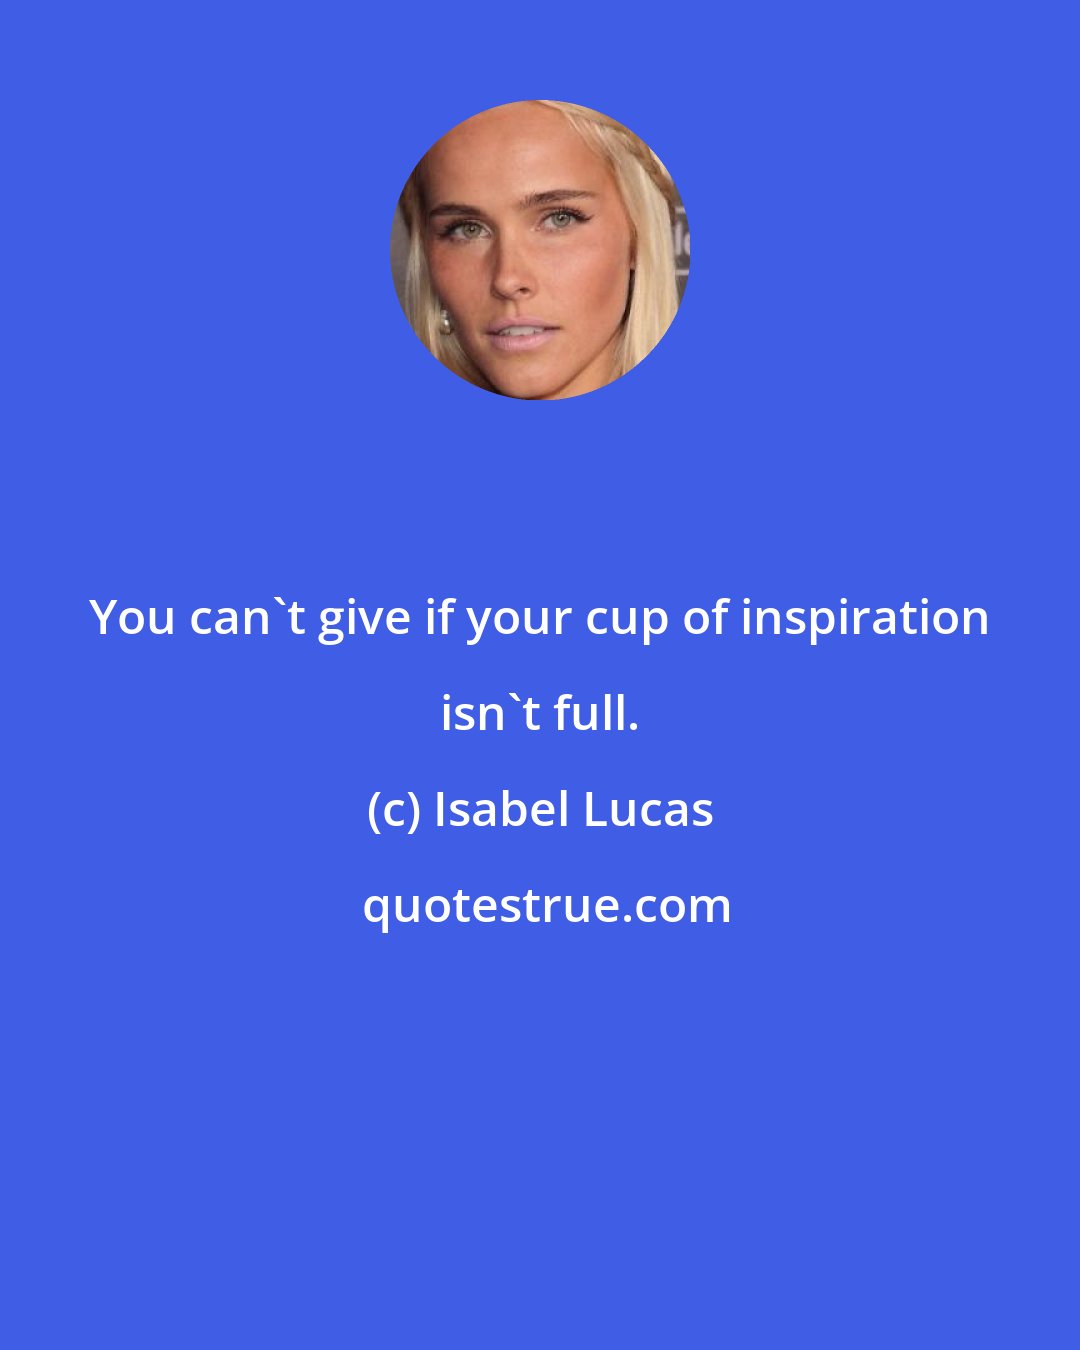 Isabel Lucas: You can't give if your cup of inspiration isn't full.